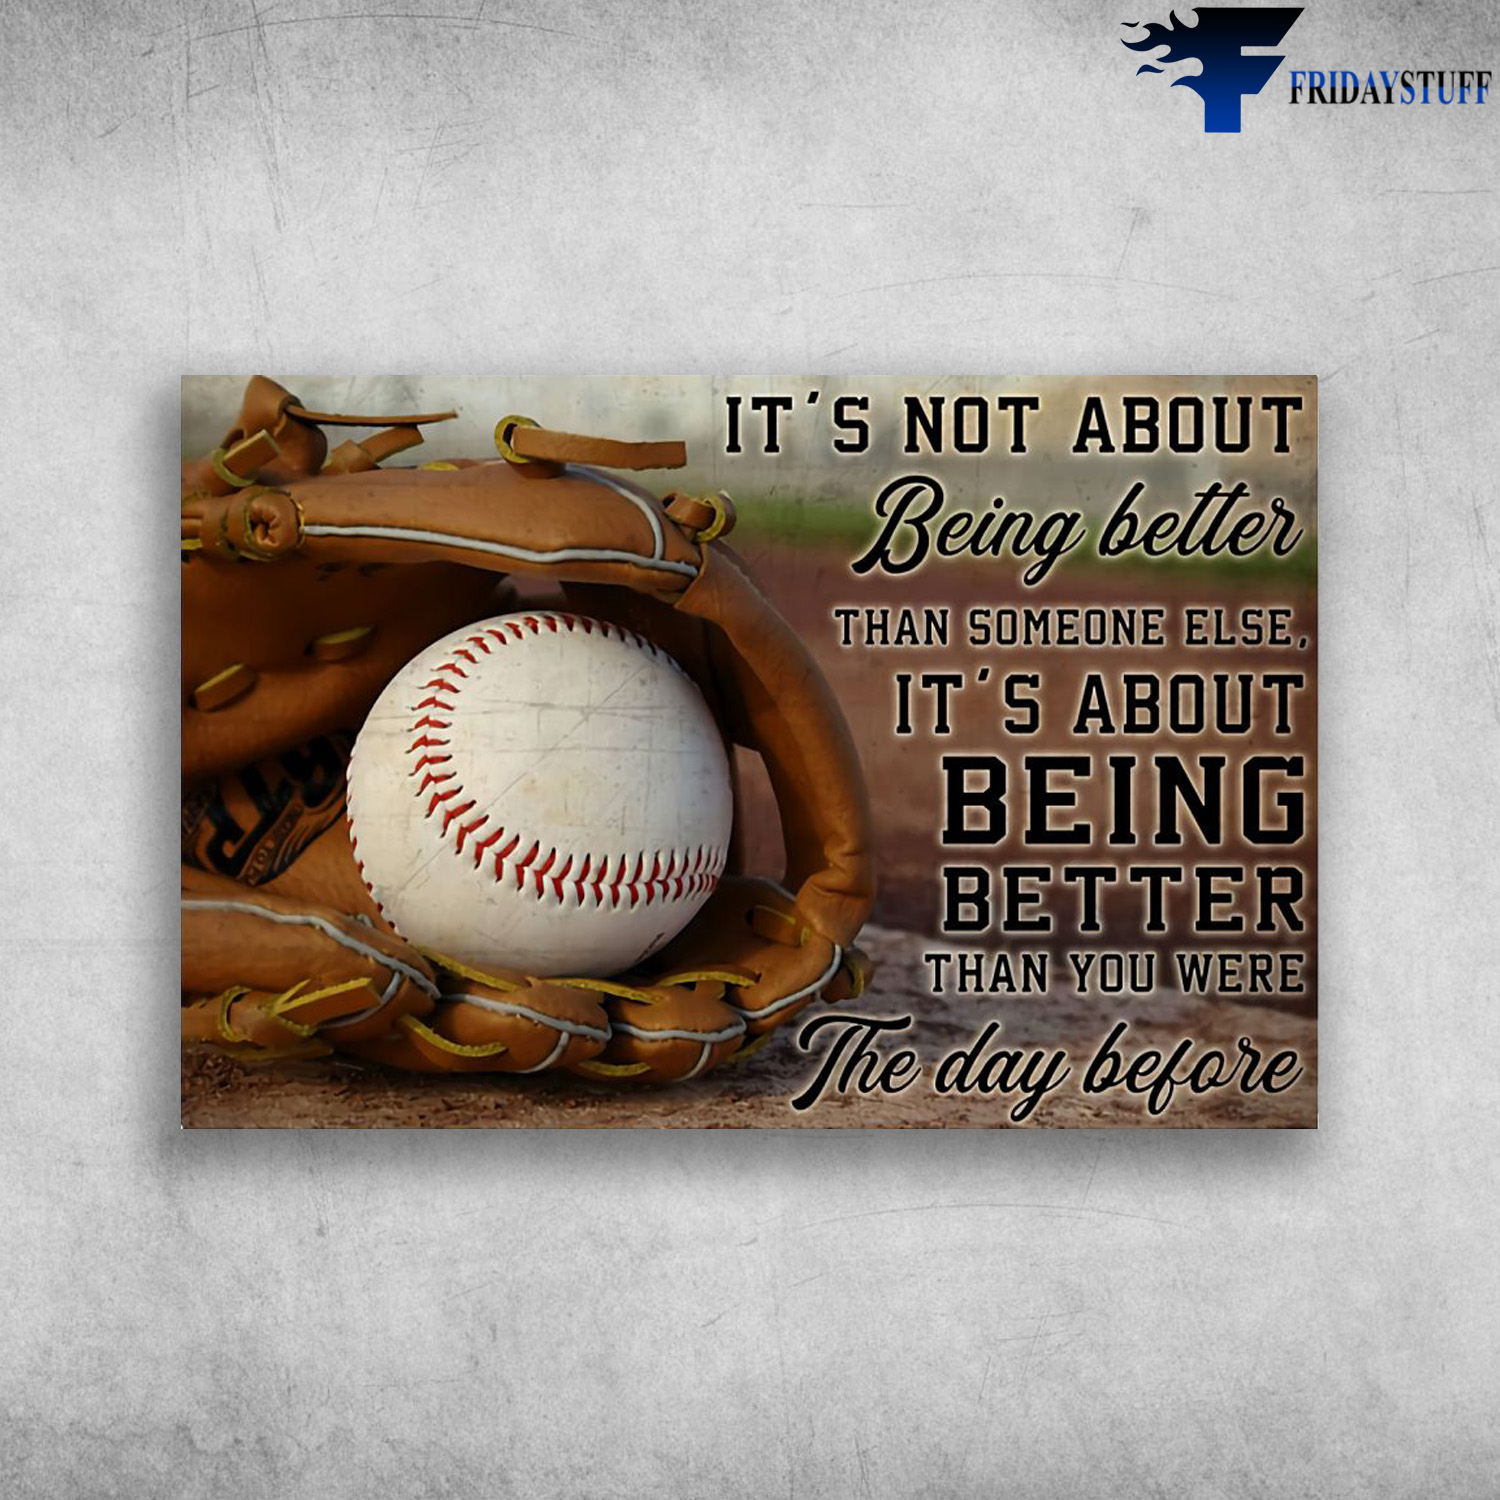 Baseball - It's Not About Being Better Than Someone Else, It's About Being Better Than You Were The Day Before